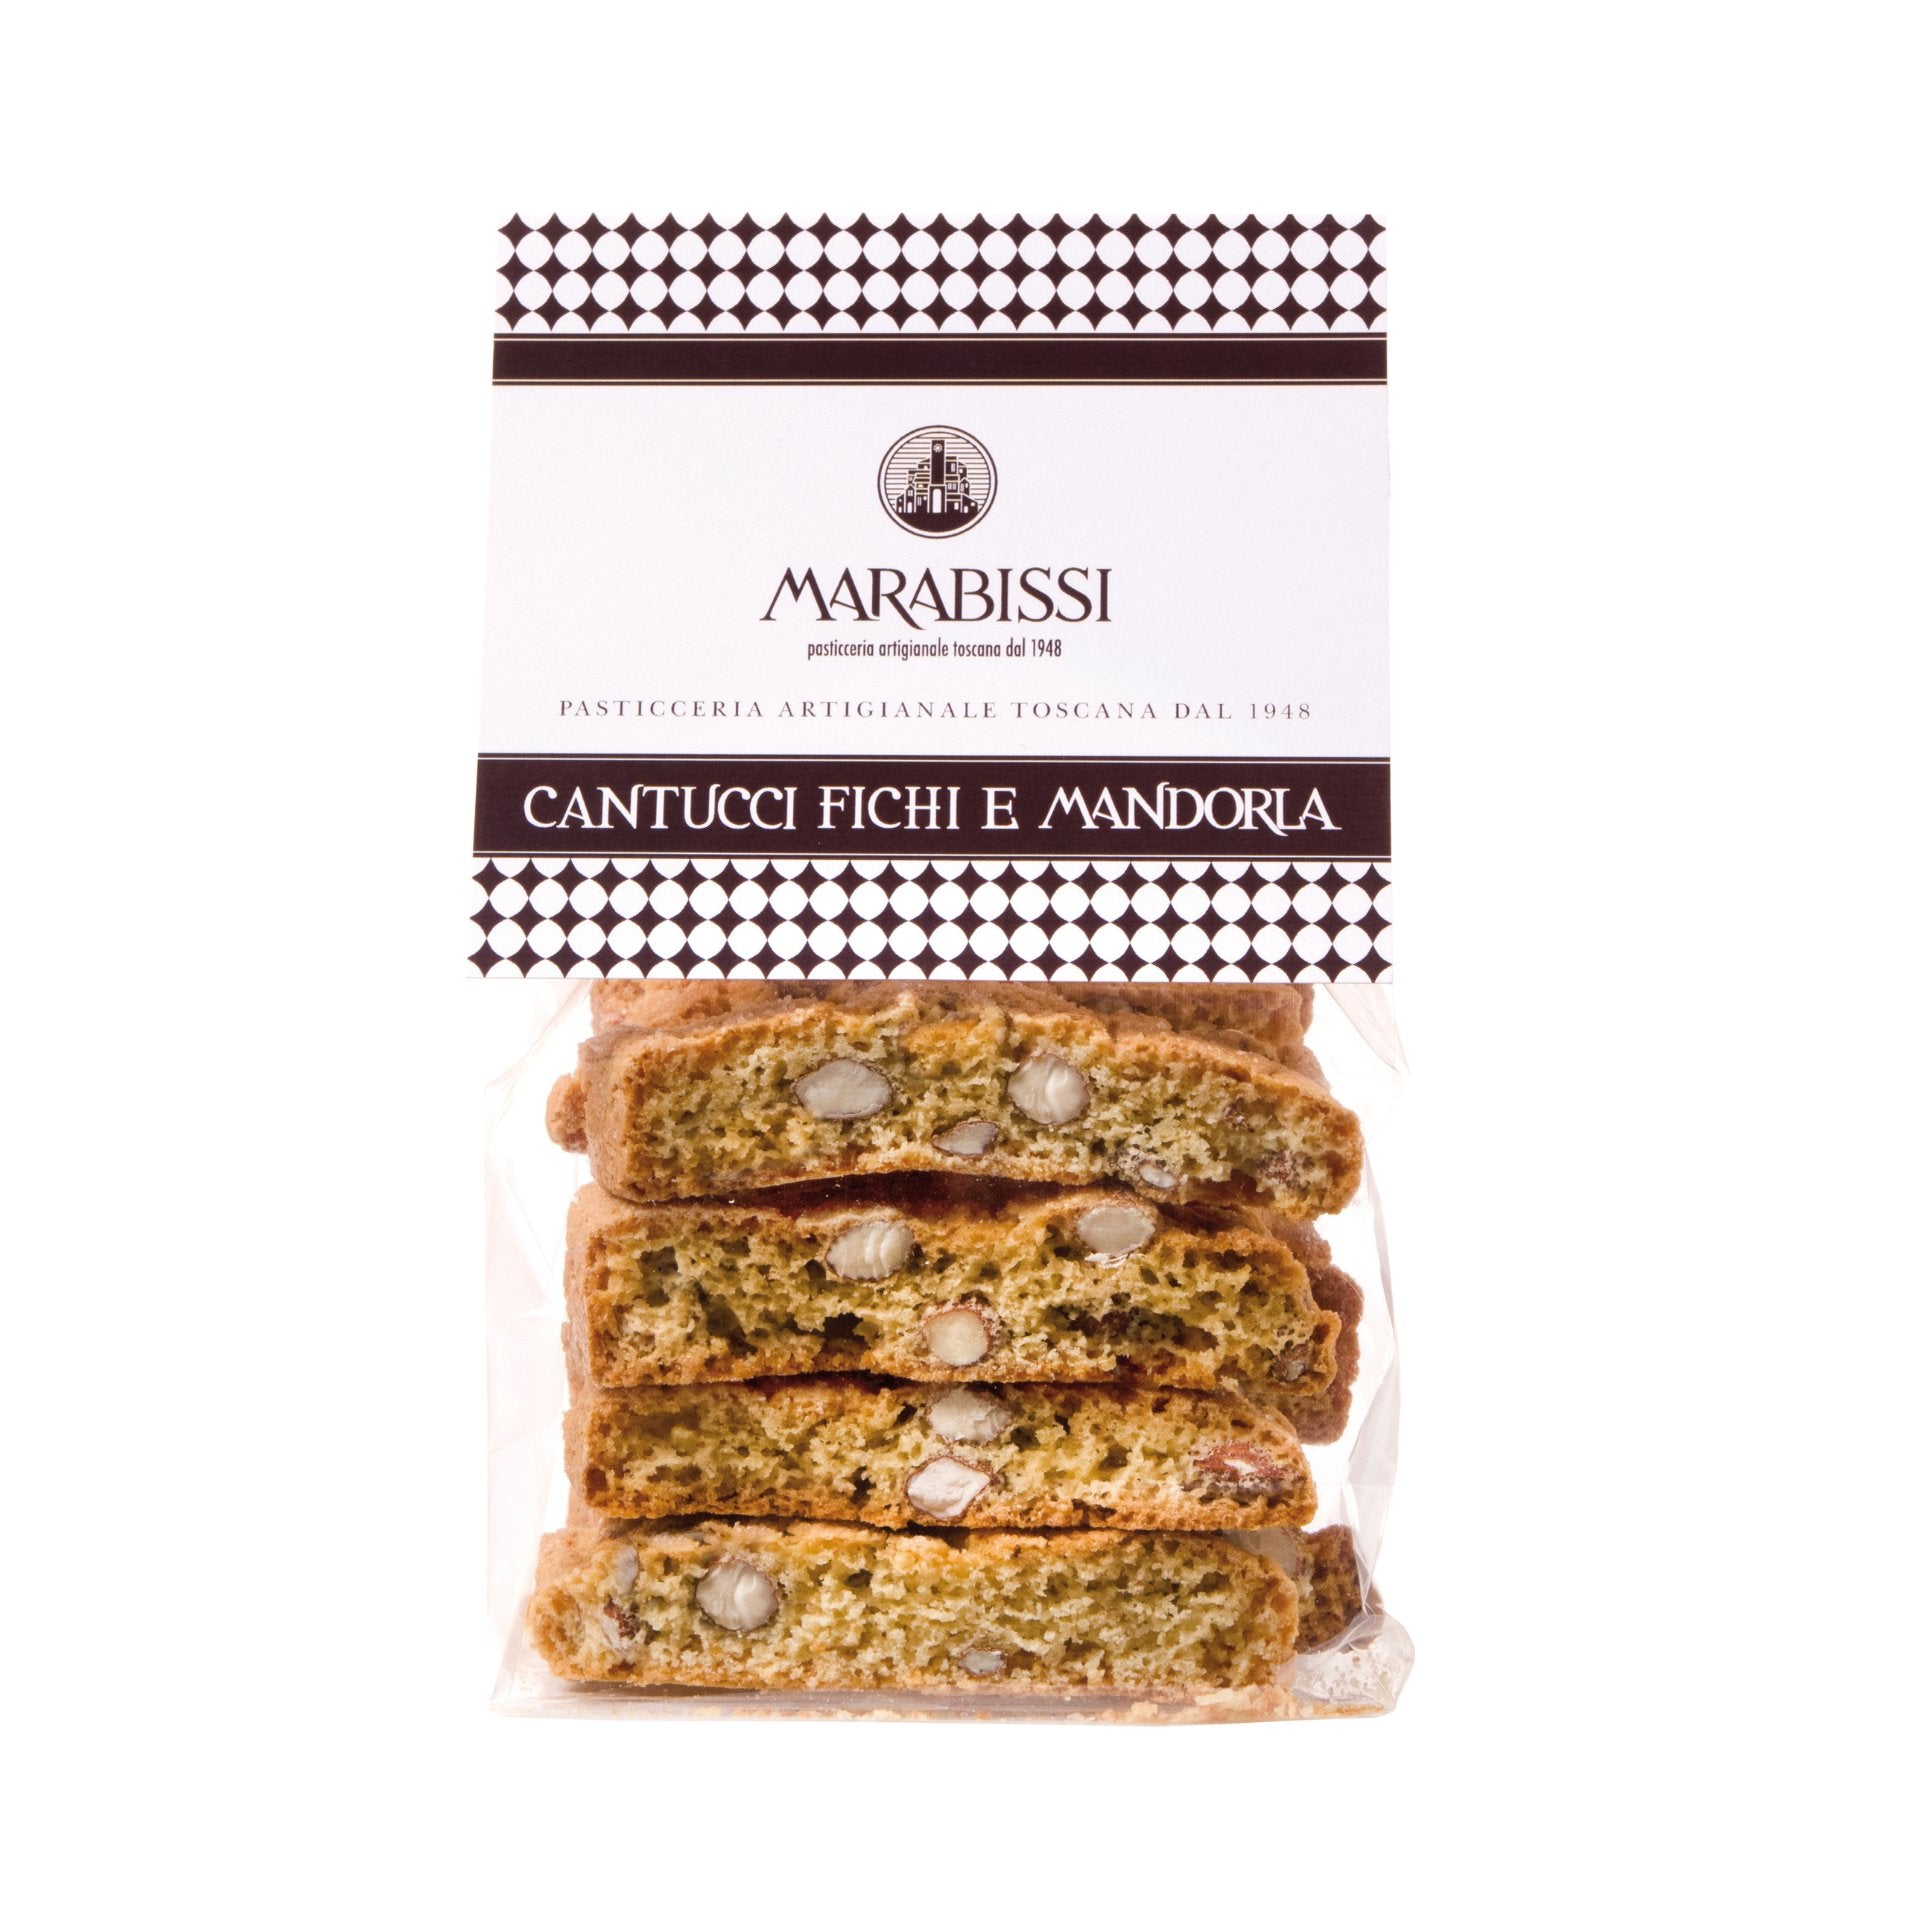 Marabissi Fig & Almond Cantucci (Bag) 200g  | Imported and distributed in the UK by Just Gourmet Foods